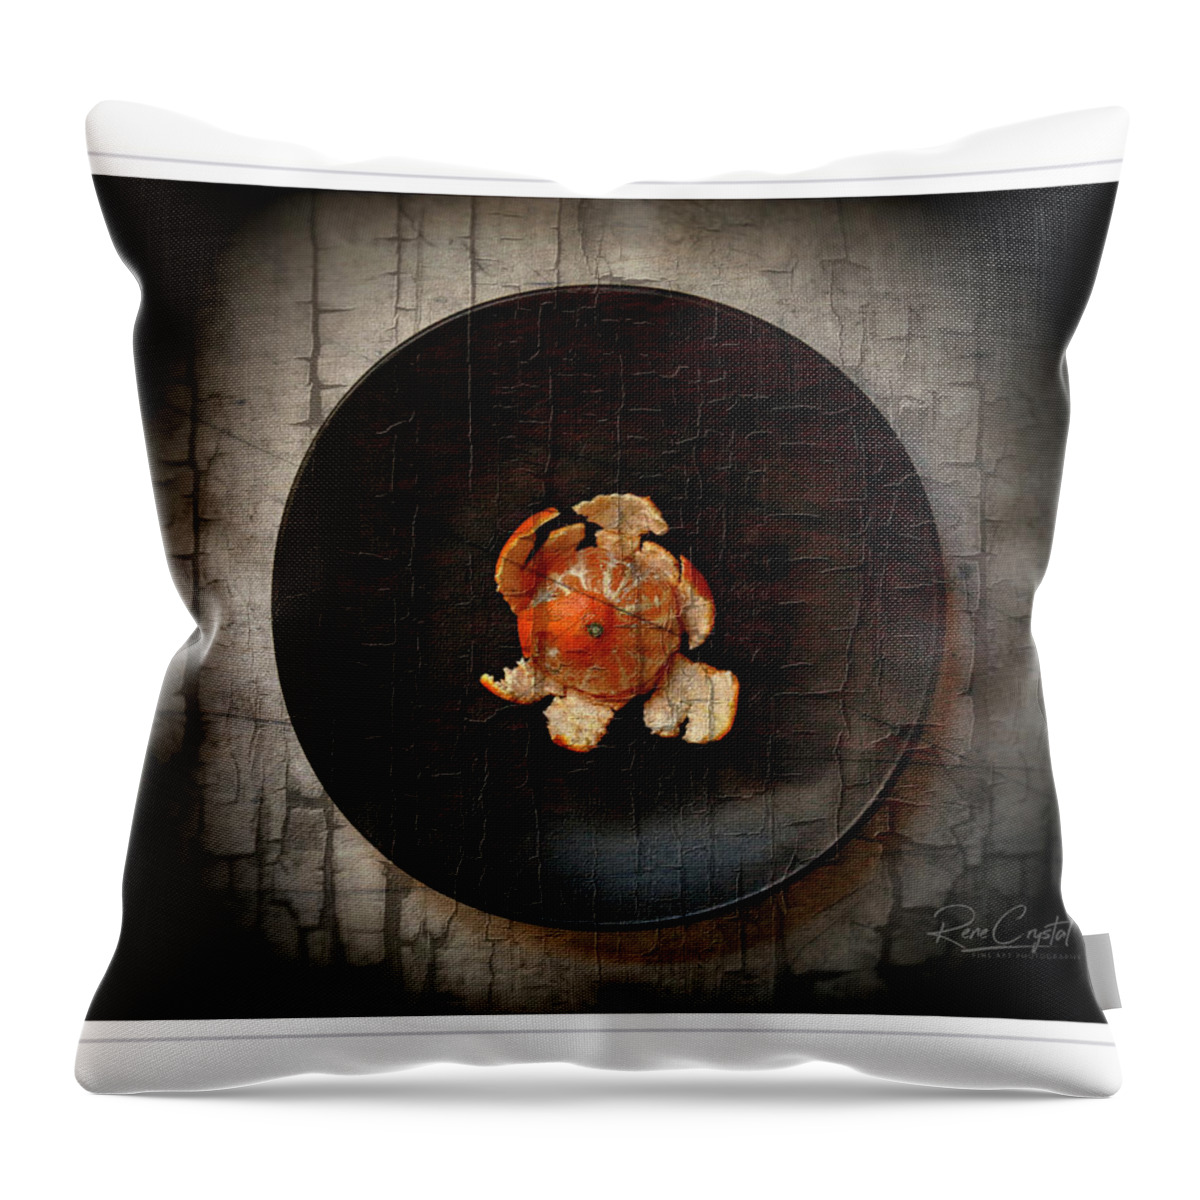 Still Life Throw Pillow featuring the photograph Exposed by Rene Crystal